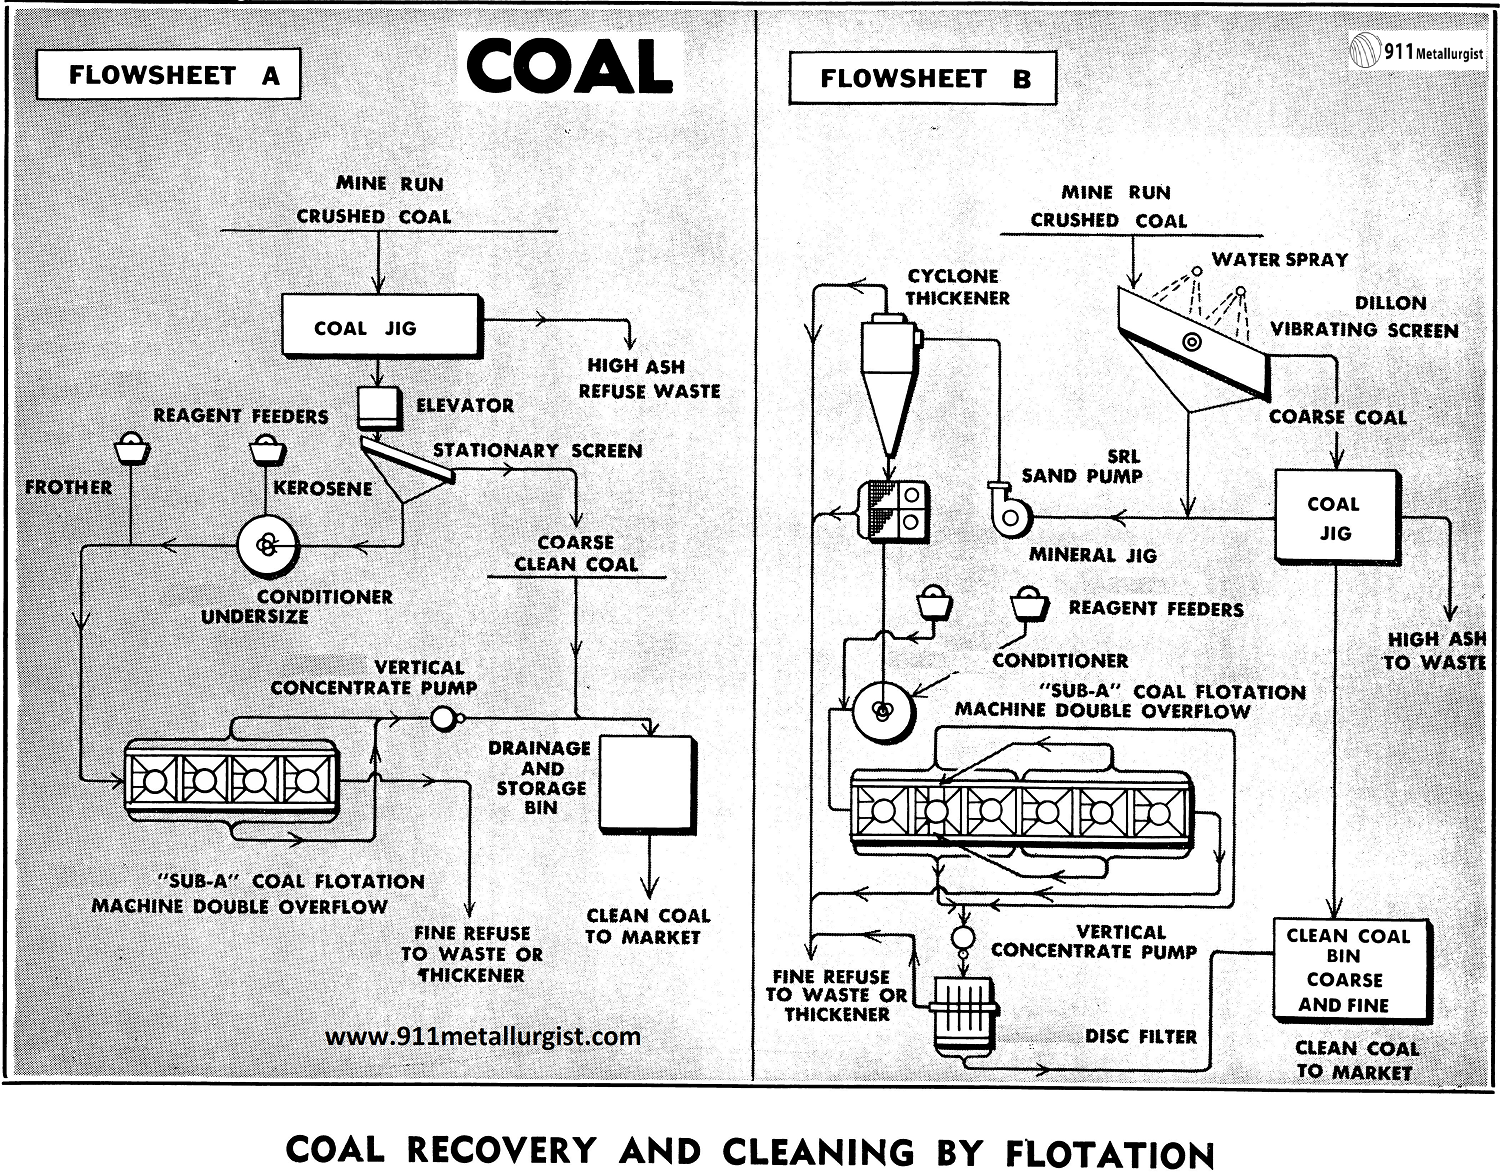 Coal Recovery and Cleaning by Flotation